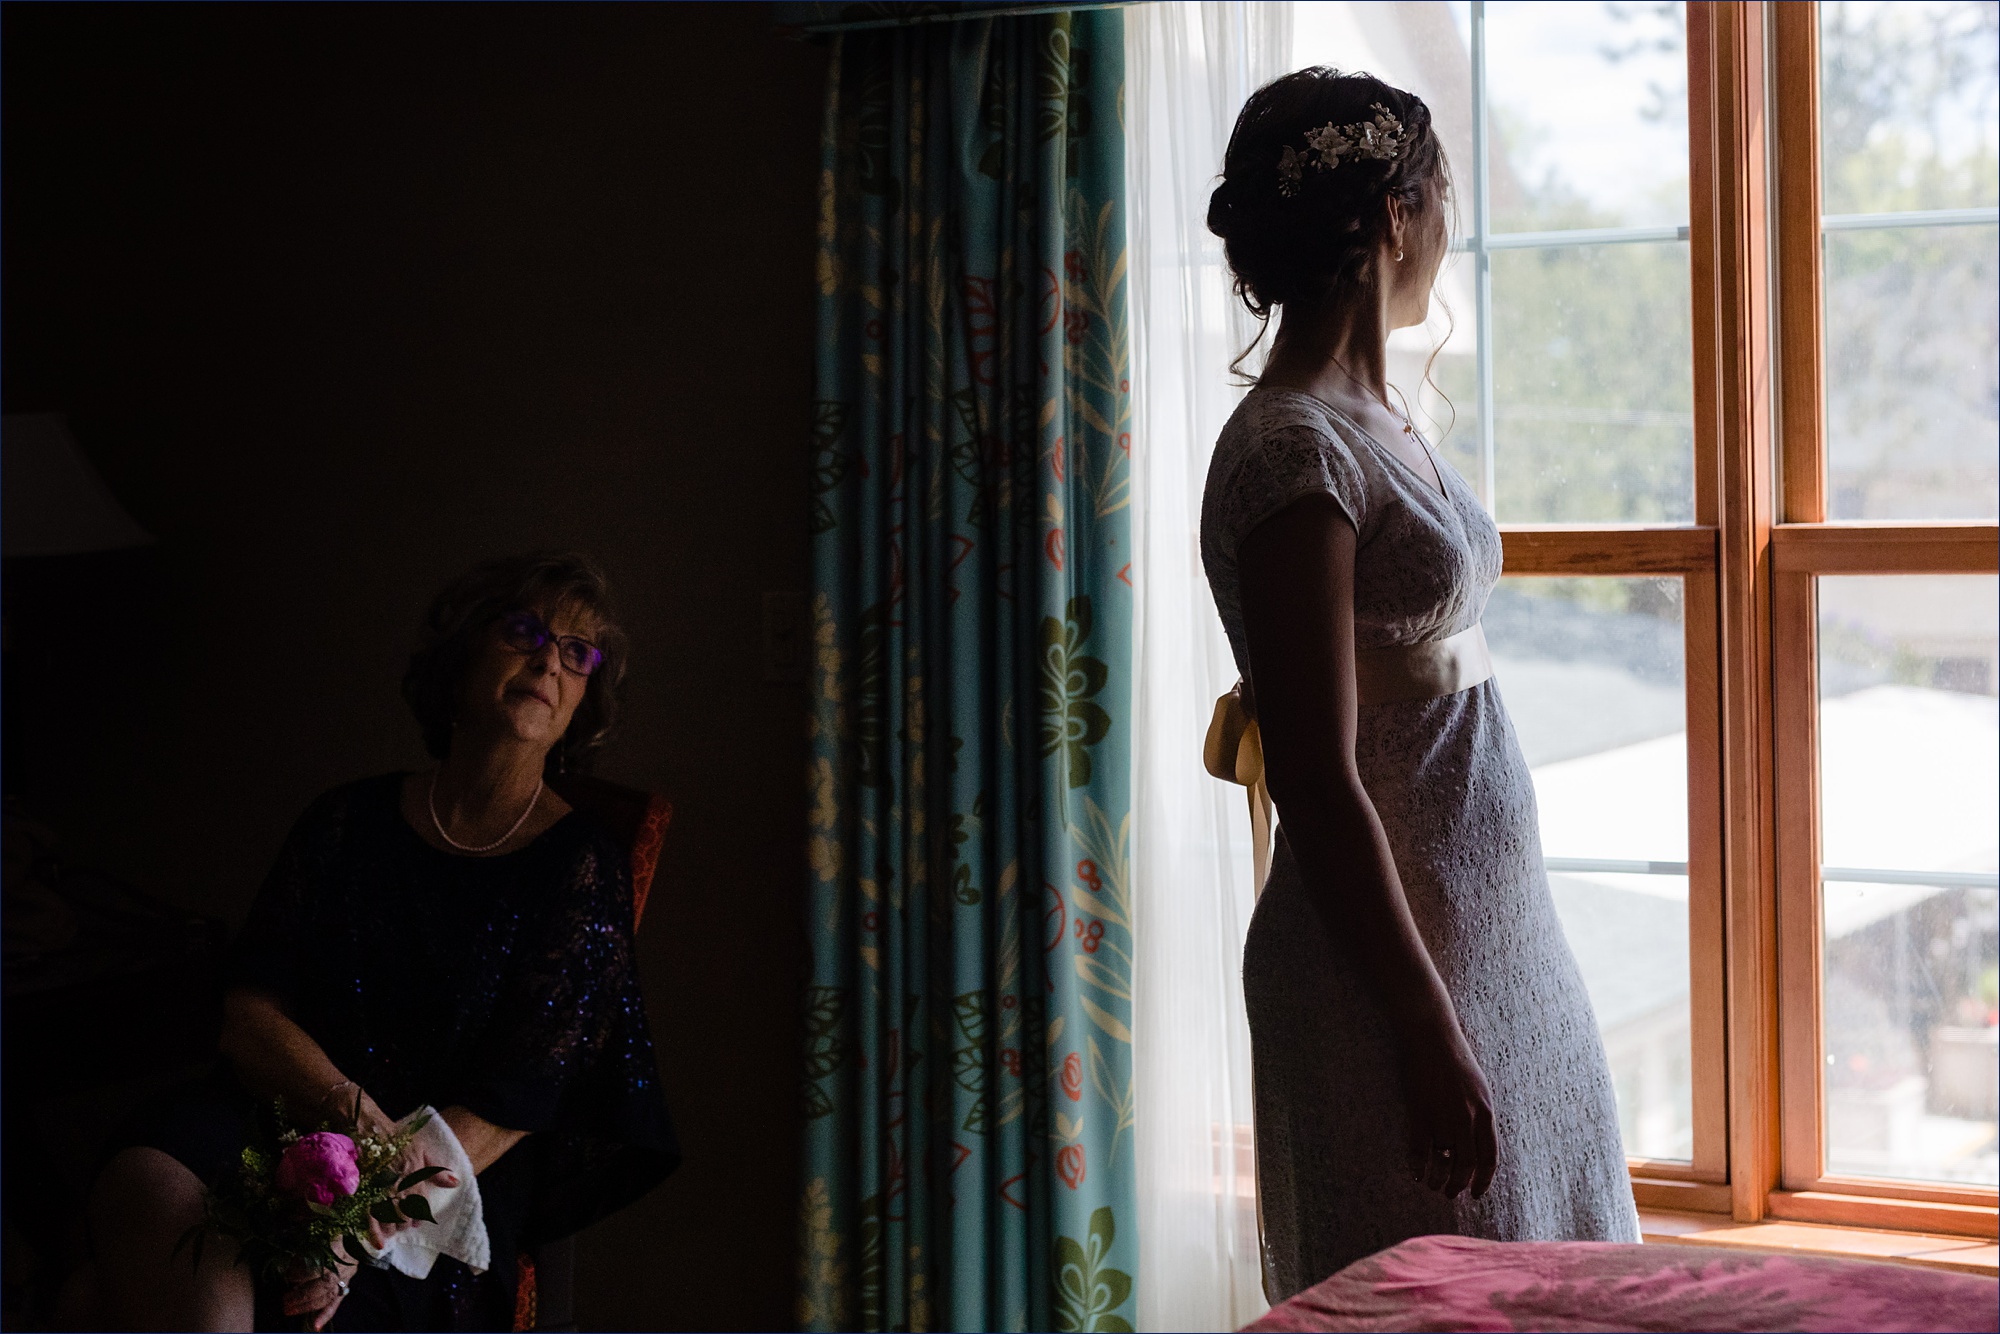 The bride looks out the window as her mom watches her 